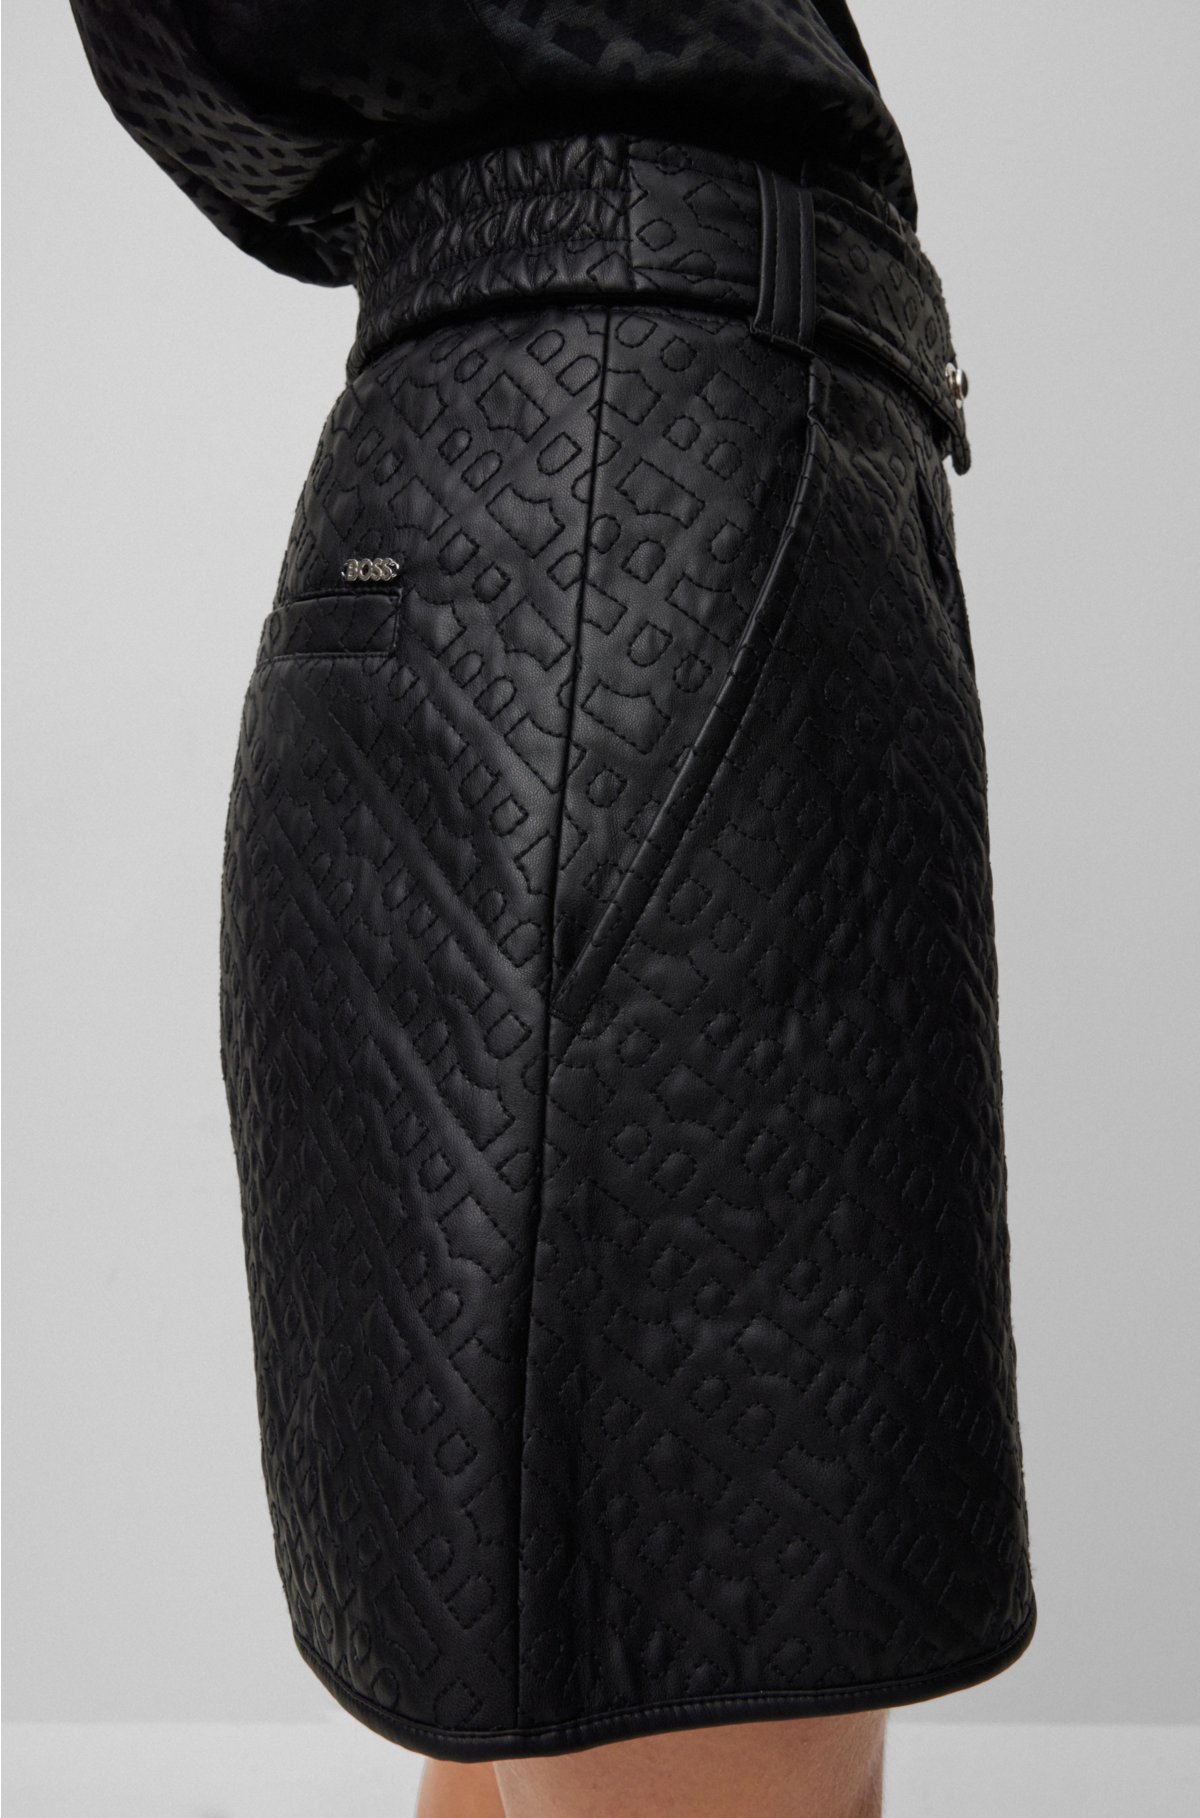 Quincy Quilted Faux Leather Shorts